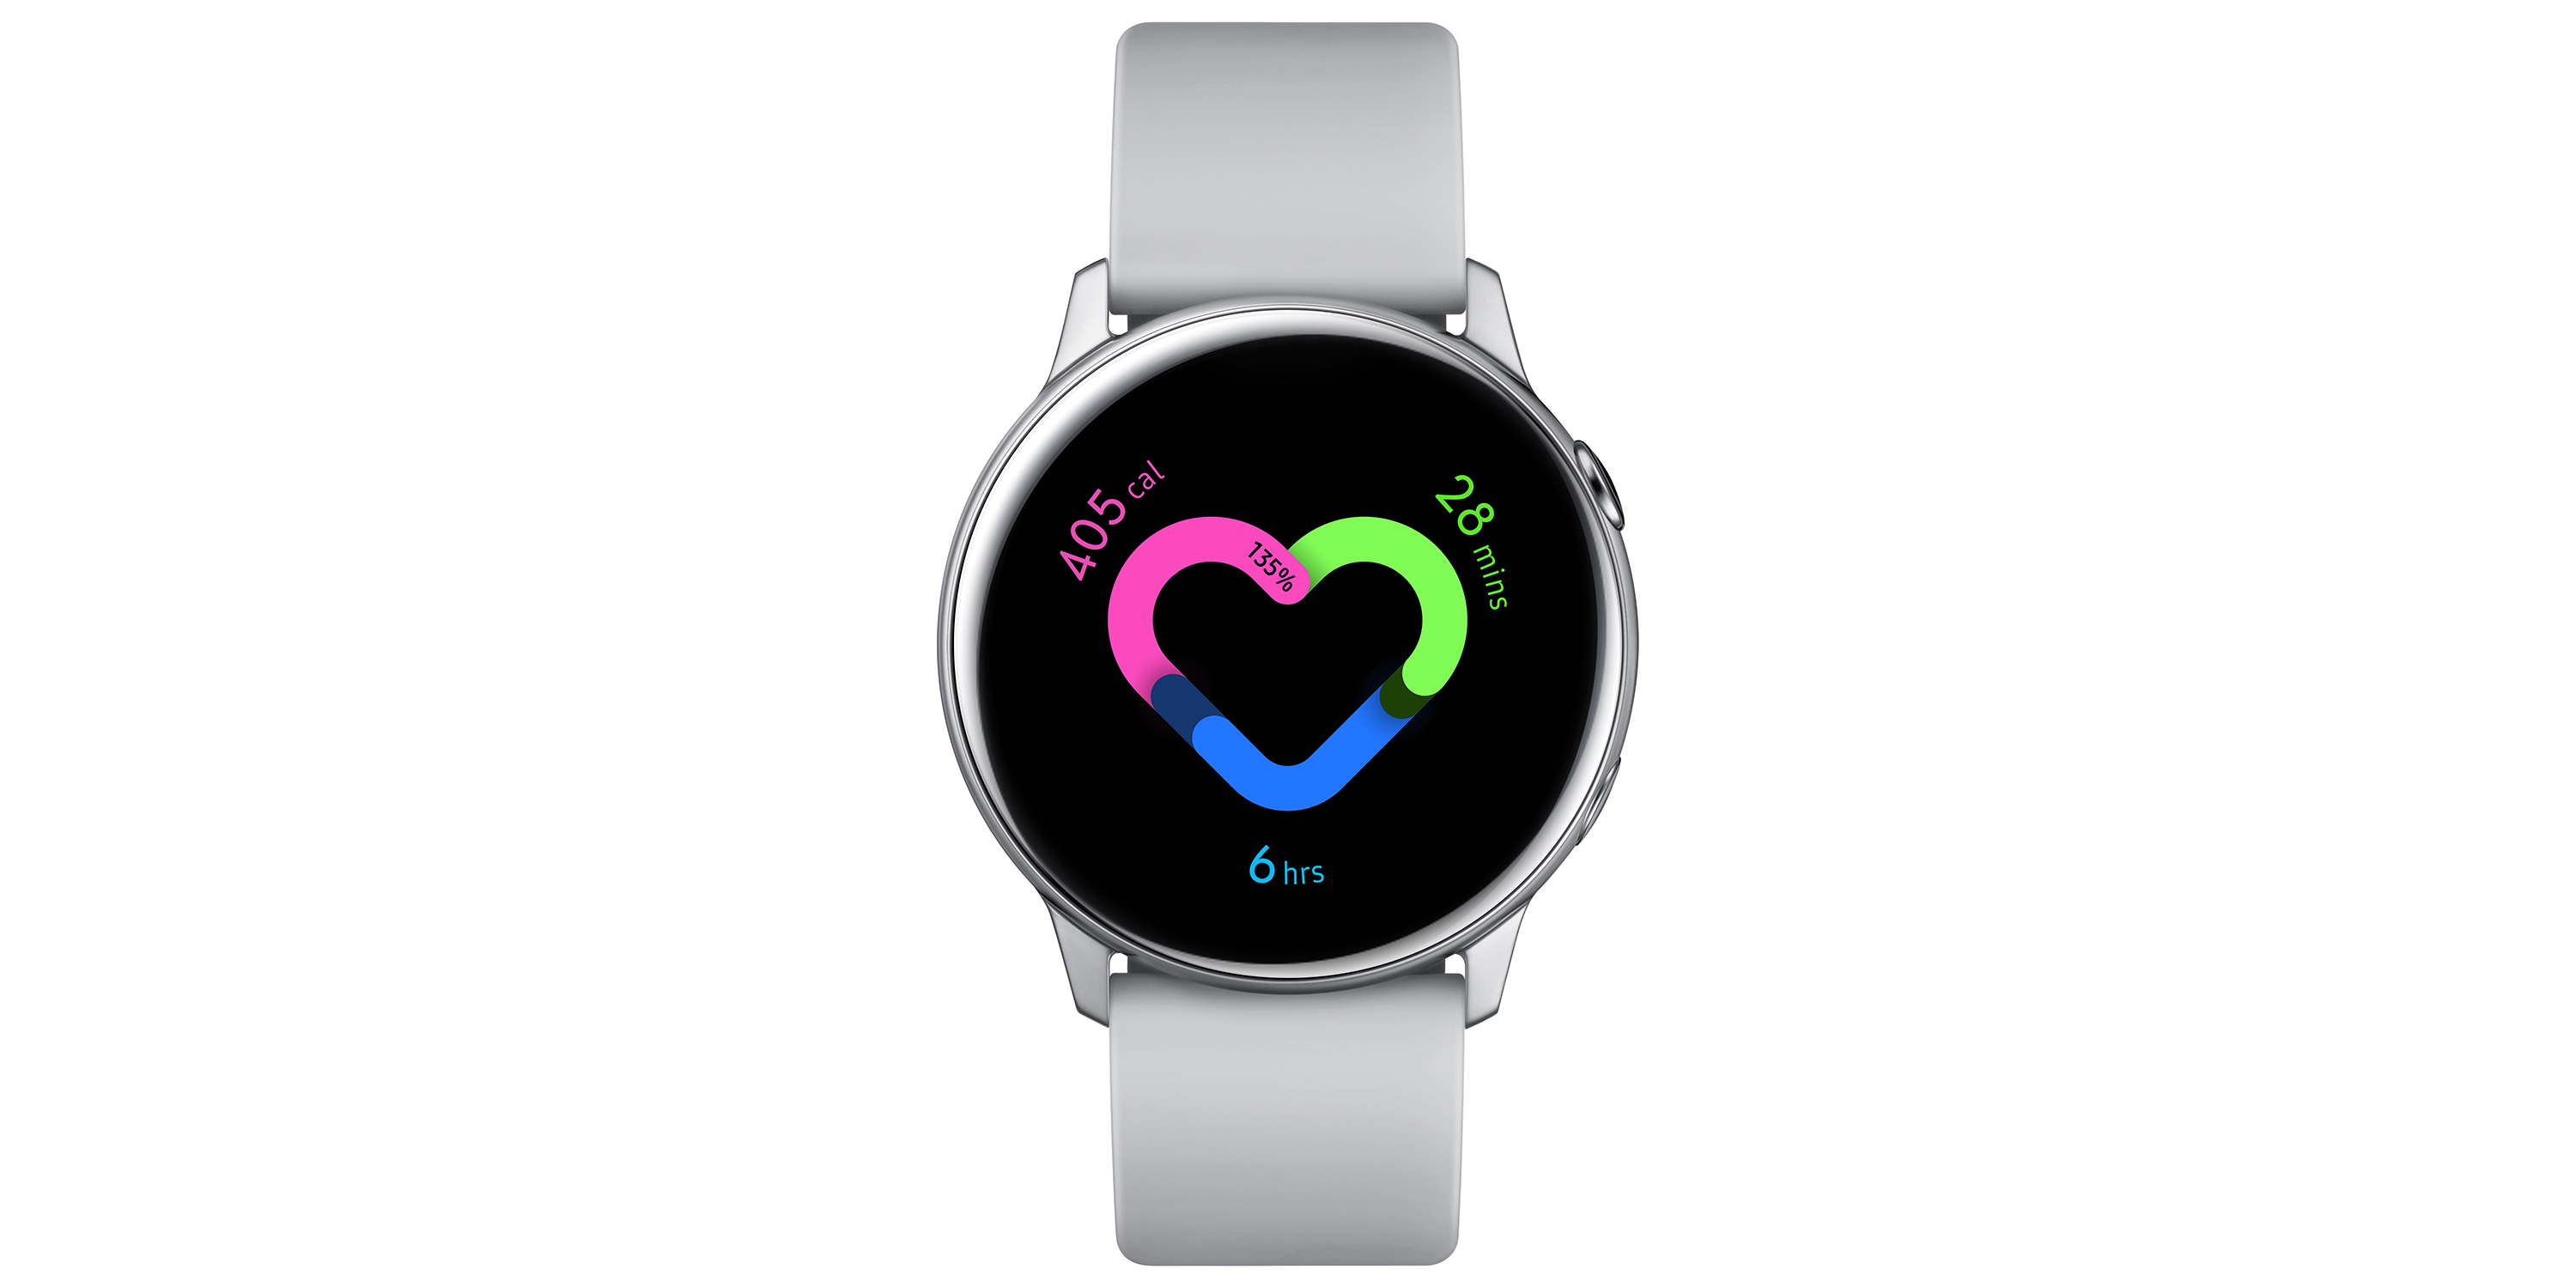 Samsung Galaxy Watch Active goes official, no rotating bezel  9to5Google